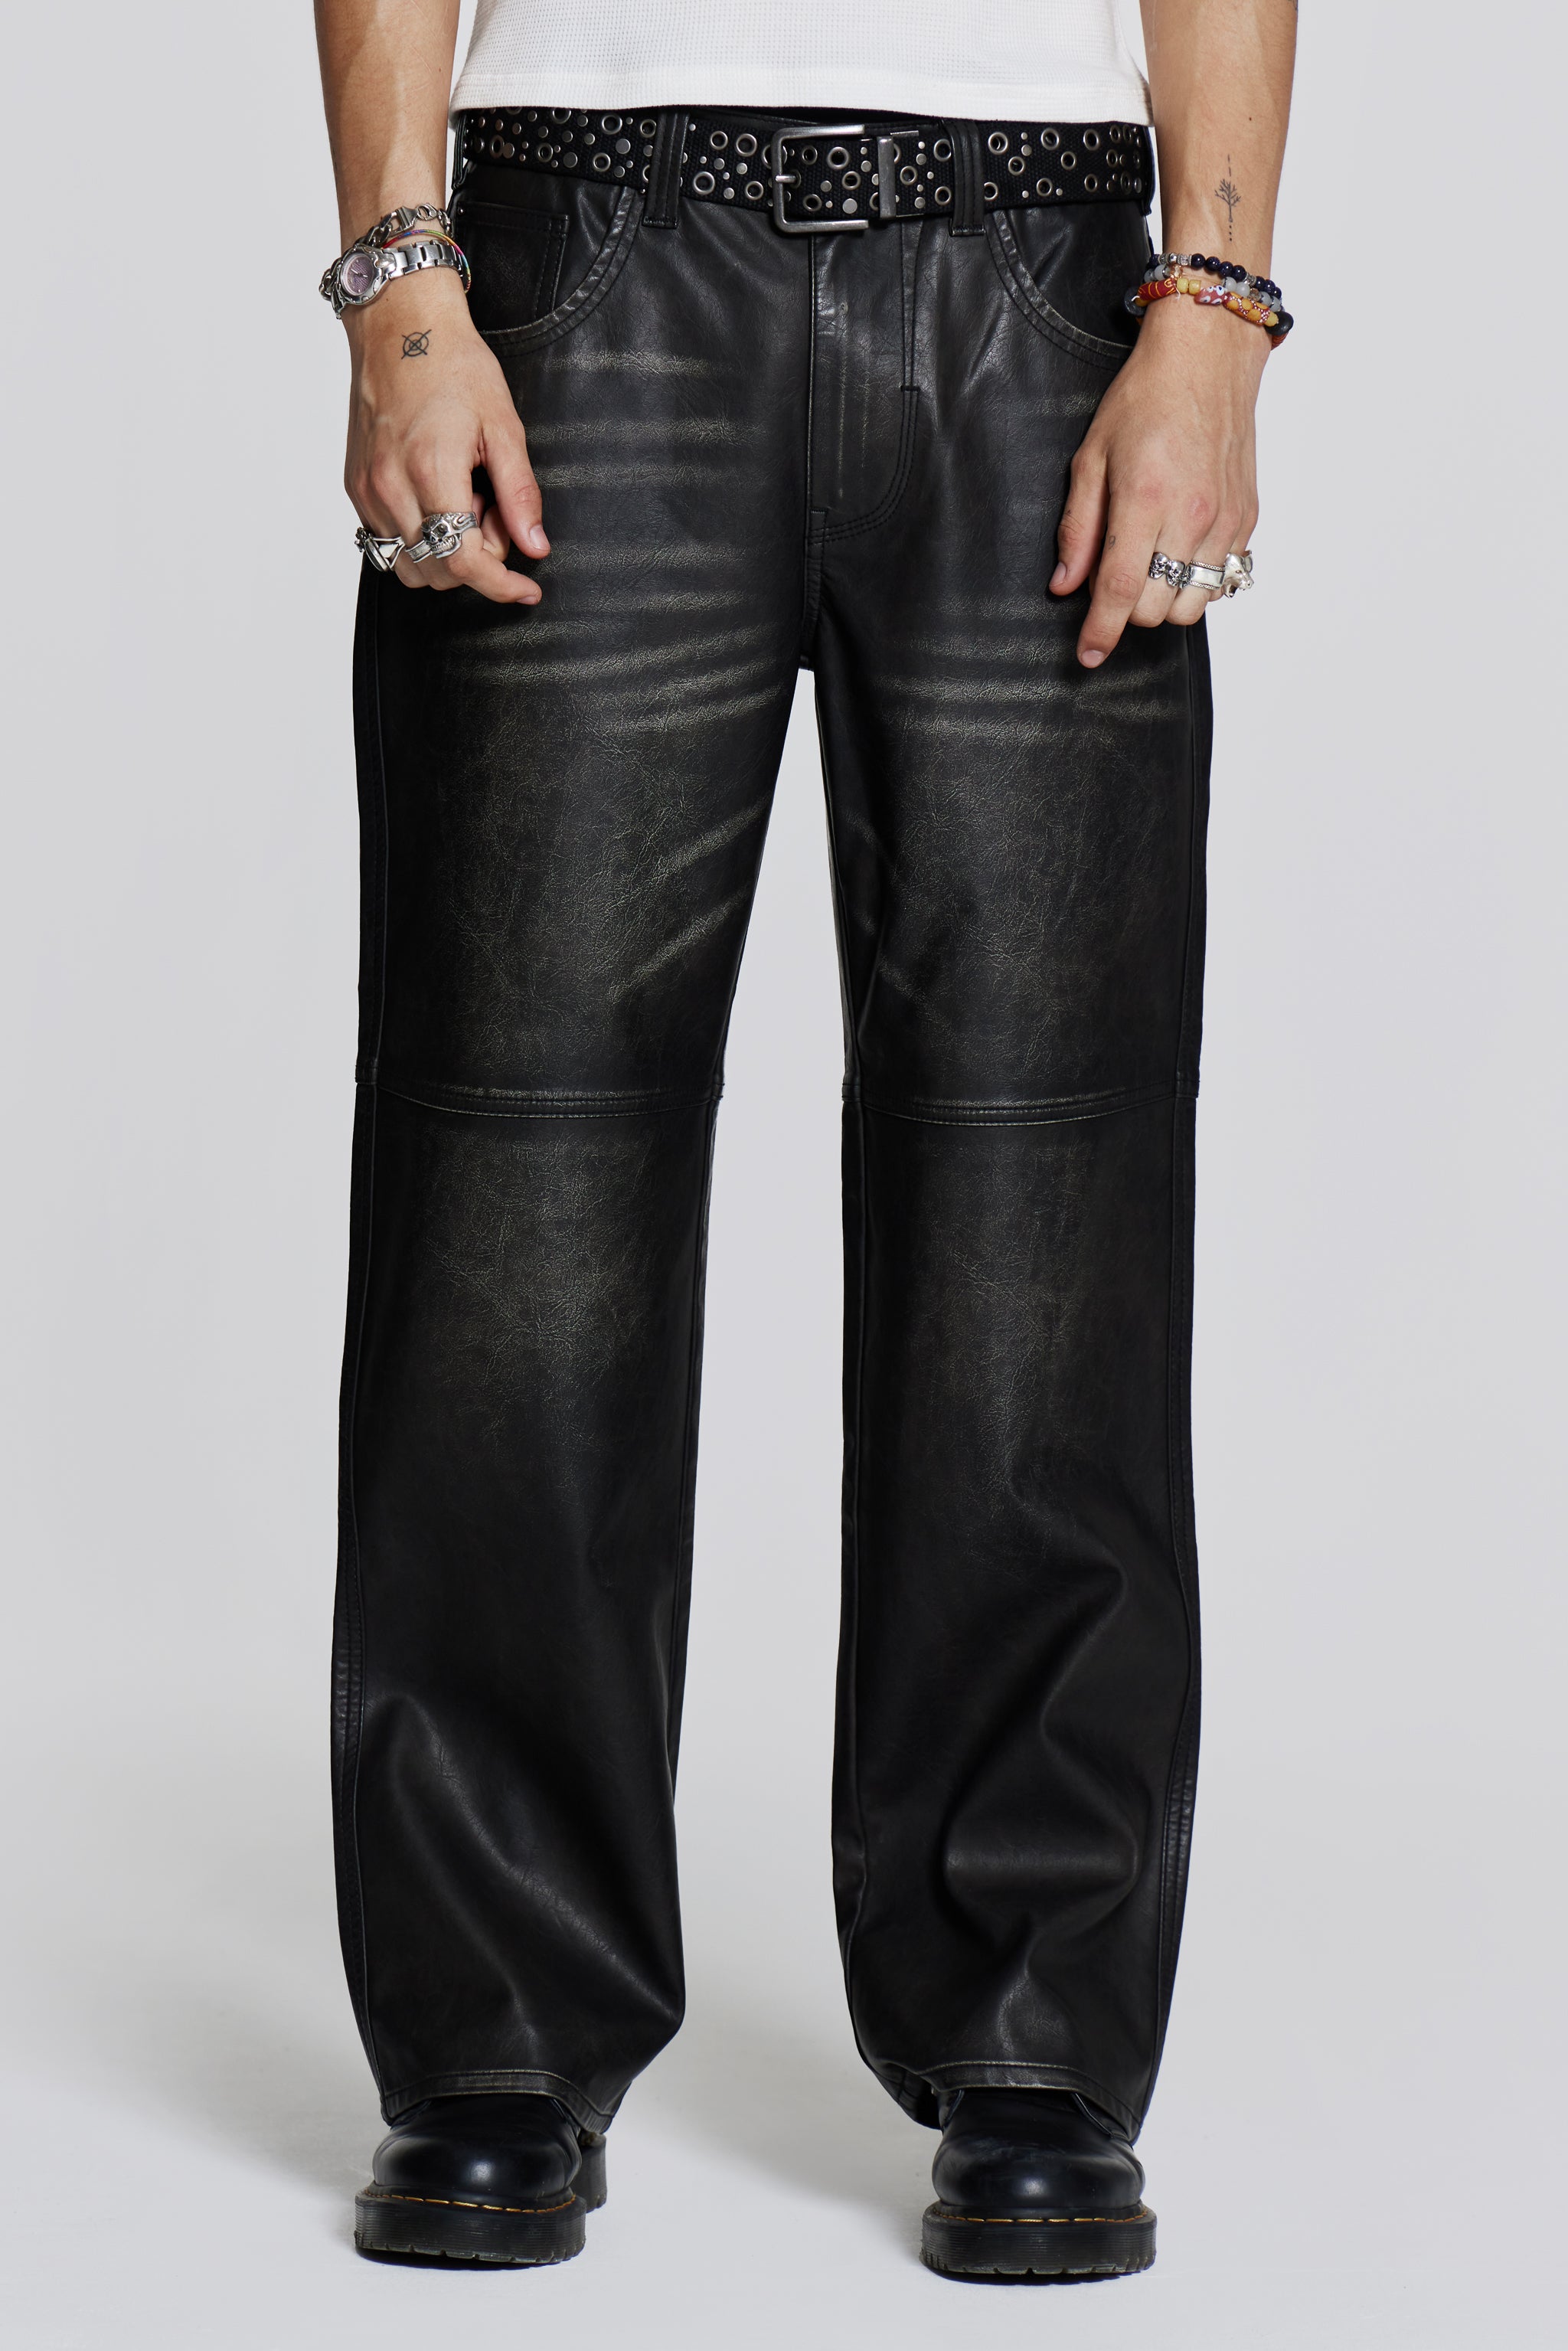 Archival Clothing Jaded London Opium Style Leather Pants